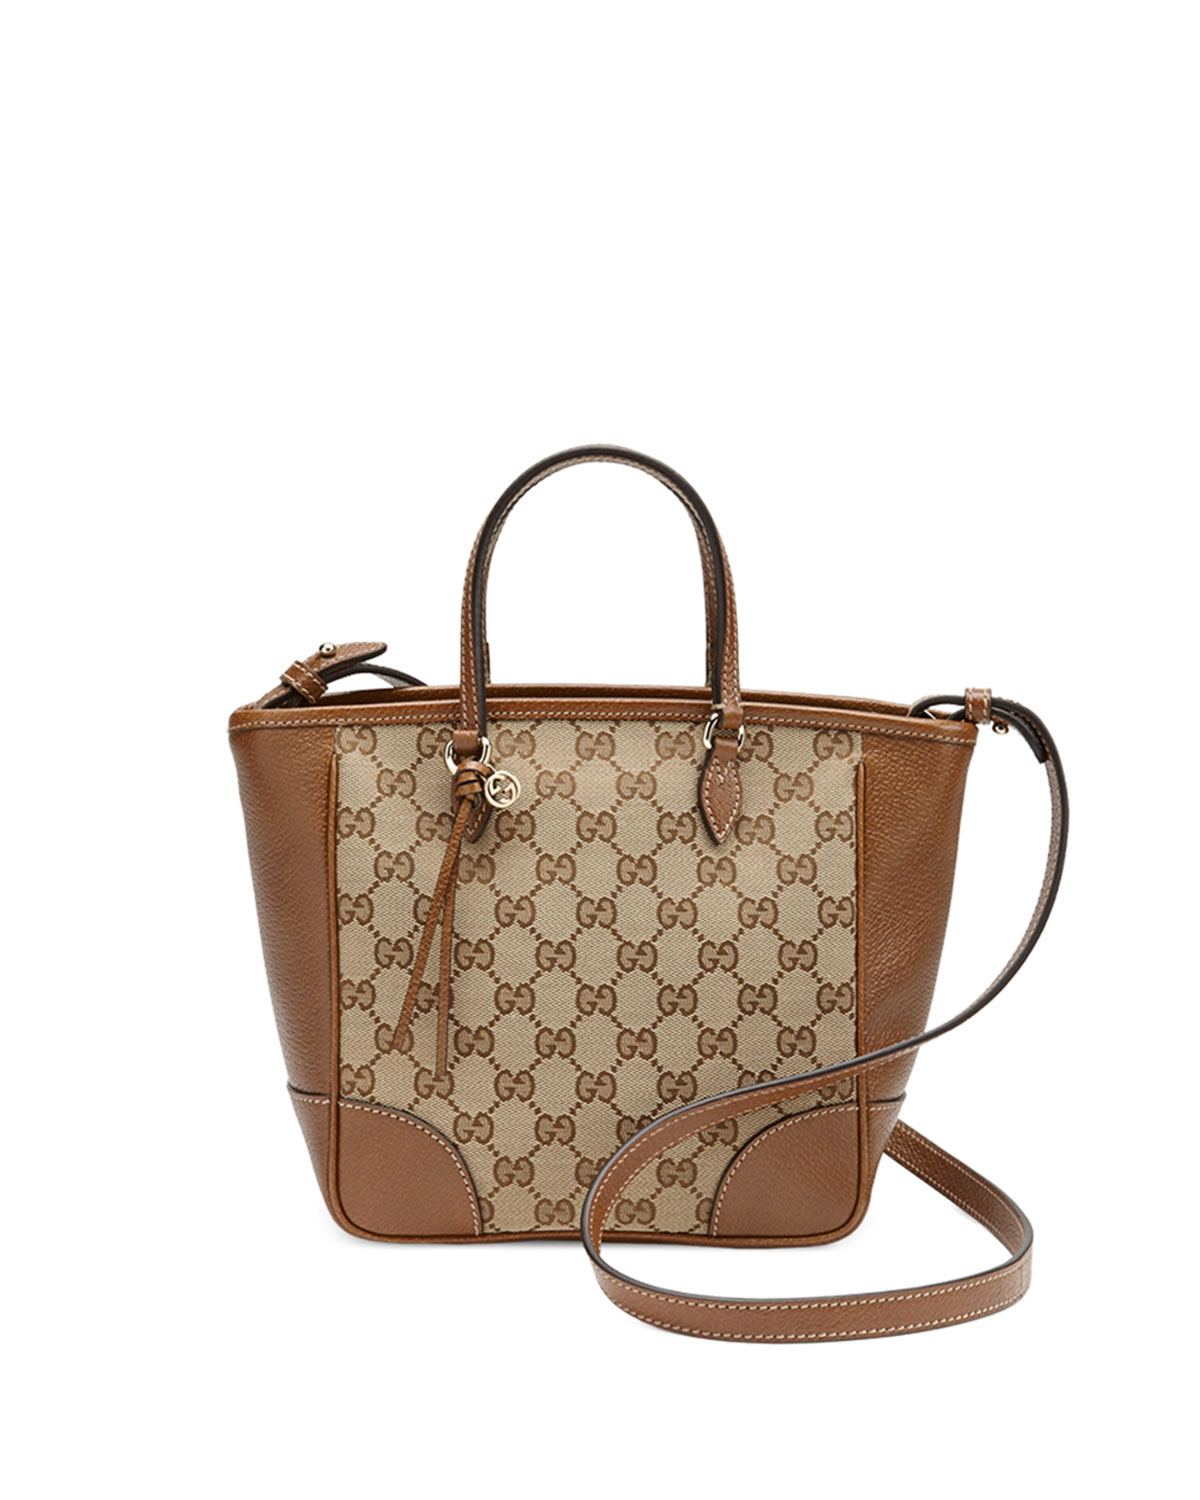 Gucci Bree Small Gg Canvas Tote Bag in Brown Pattern (Brown) - Lyst